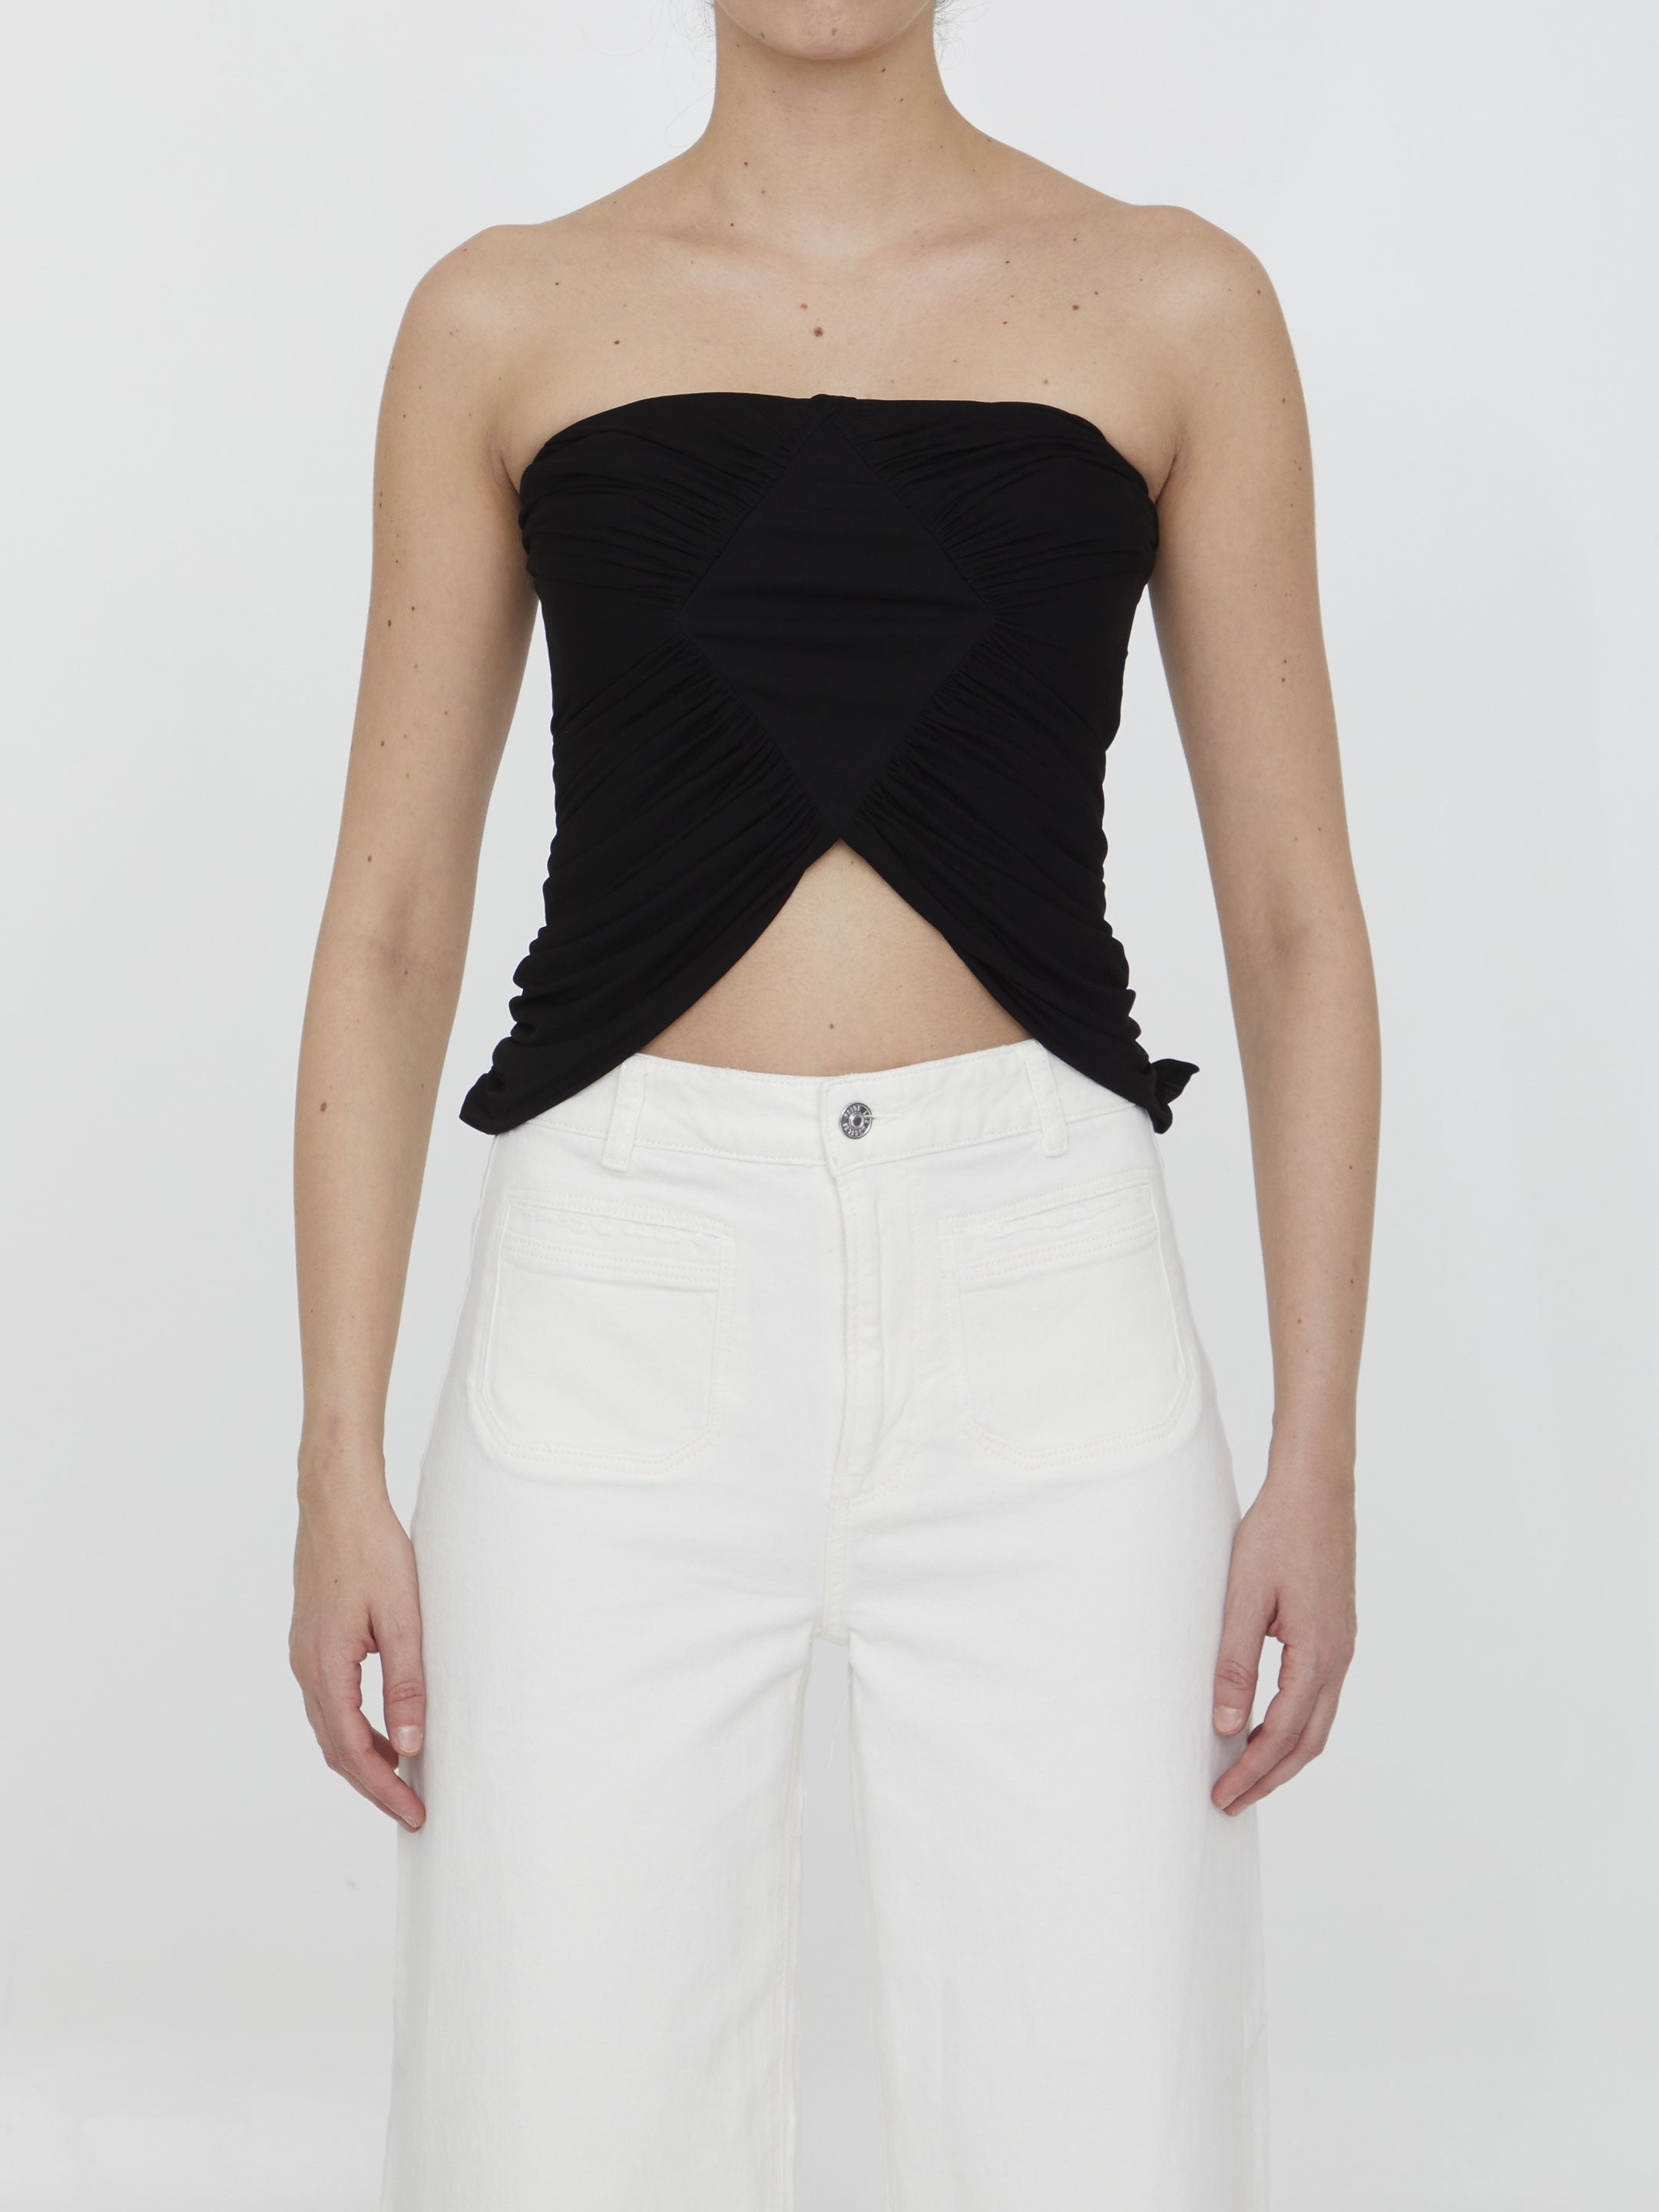 SAINT-LAURENT-OUTLET-SALE-Bustier-in-jersey-Shirts-38-BLACK-ARCHIVE-COLLECTION.jpg